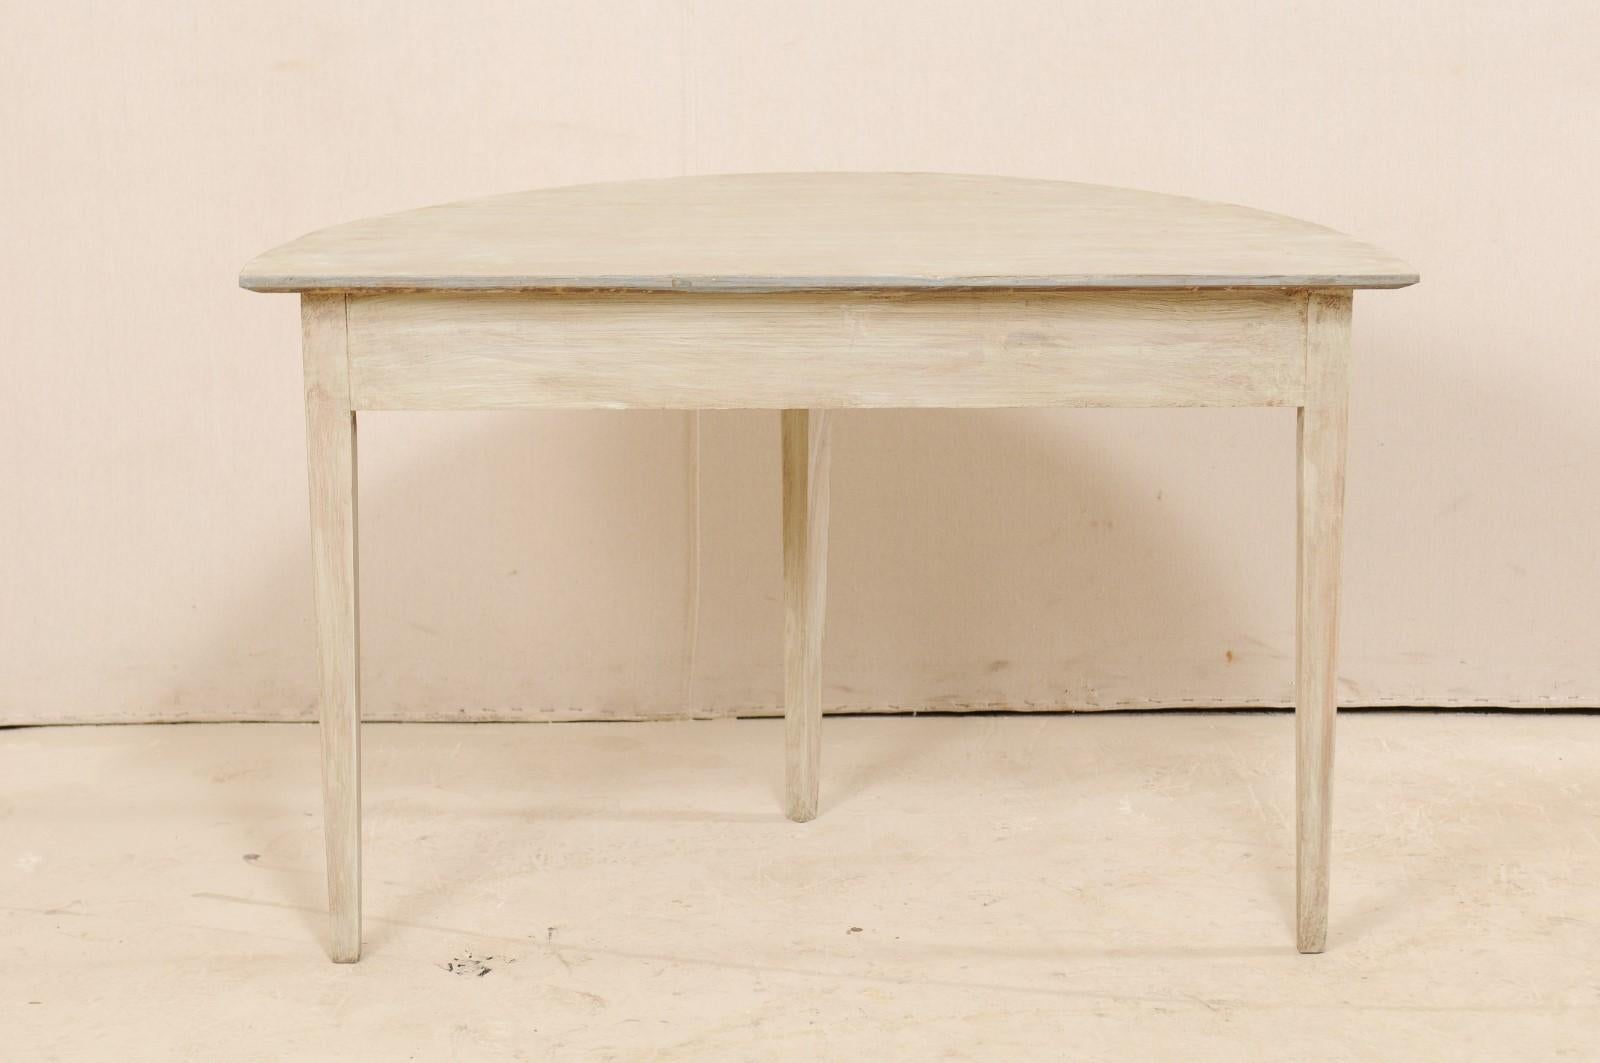 Single Swedish Demilune Table from 19th Century 4